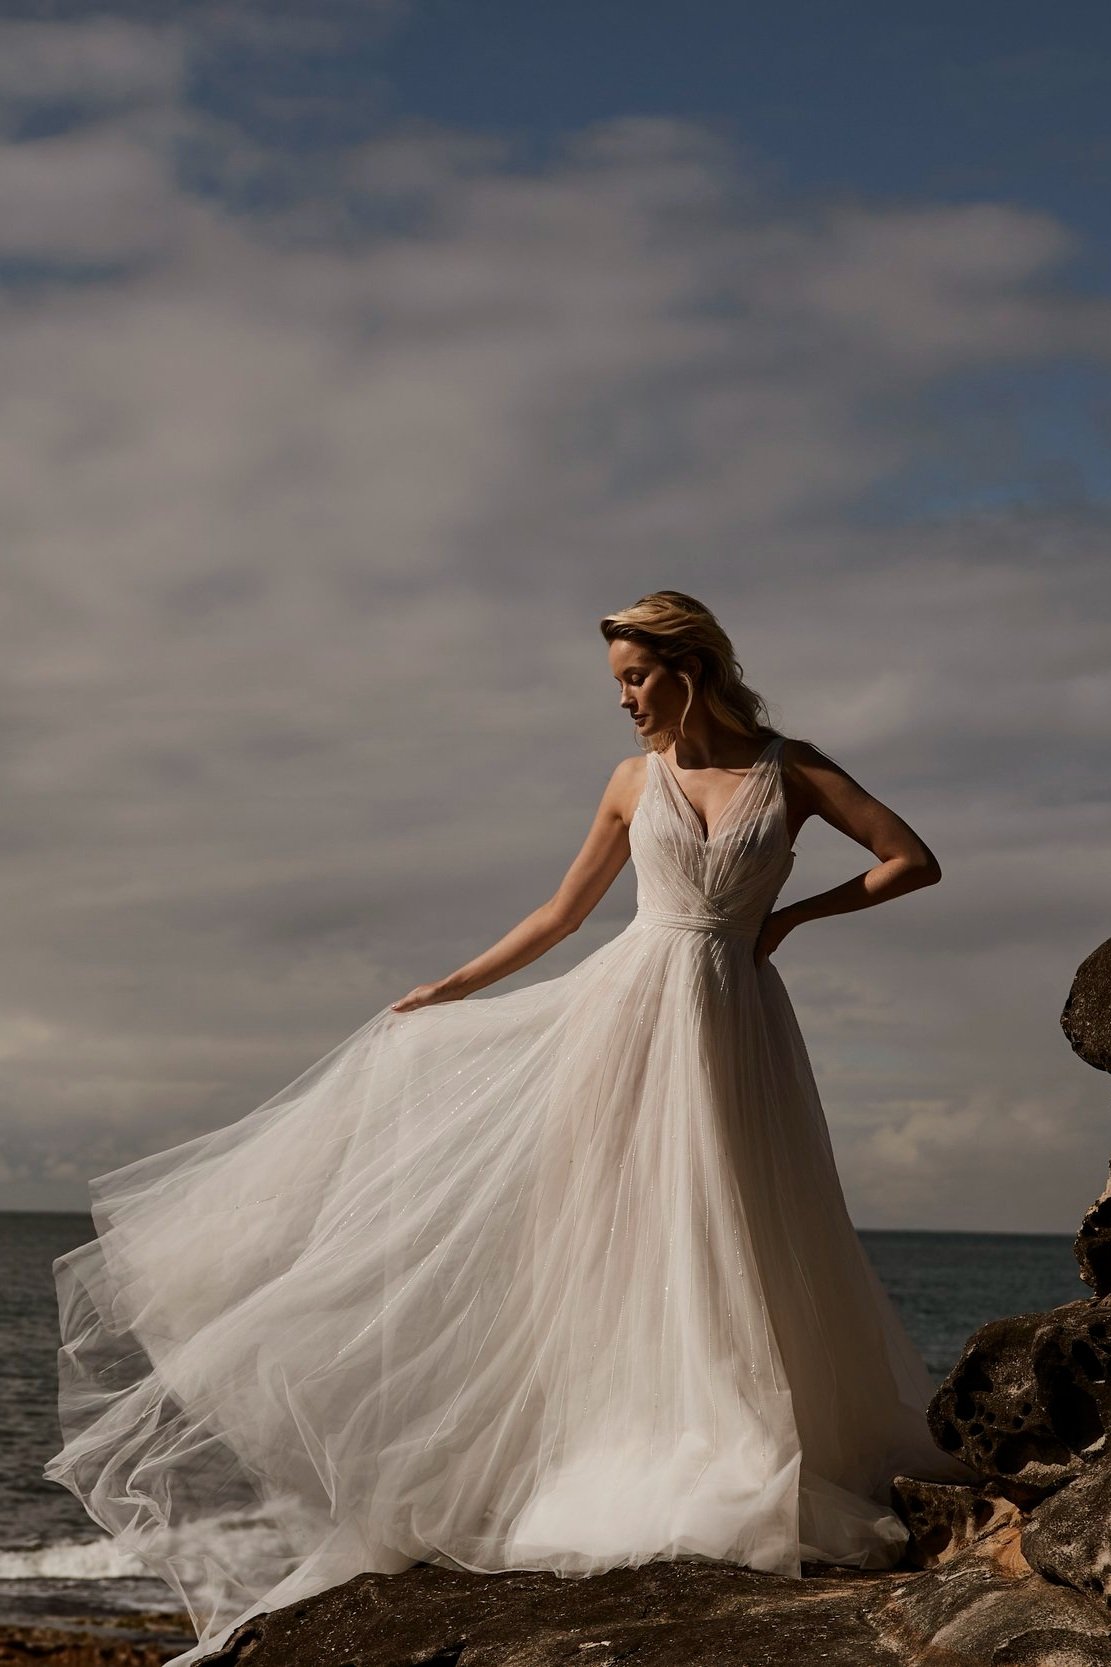 The+Dawn+Wedding+Gown++V+neck+A+line+Dress+with+Draped+Beaded+Details.jpg